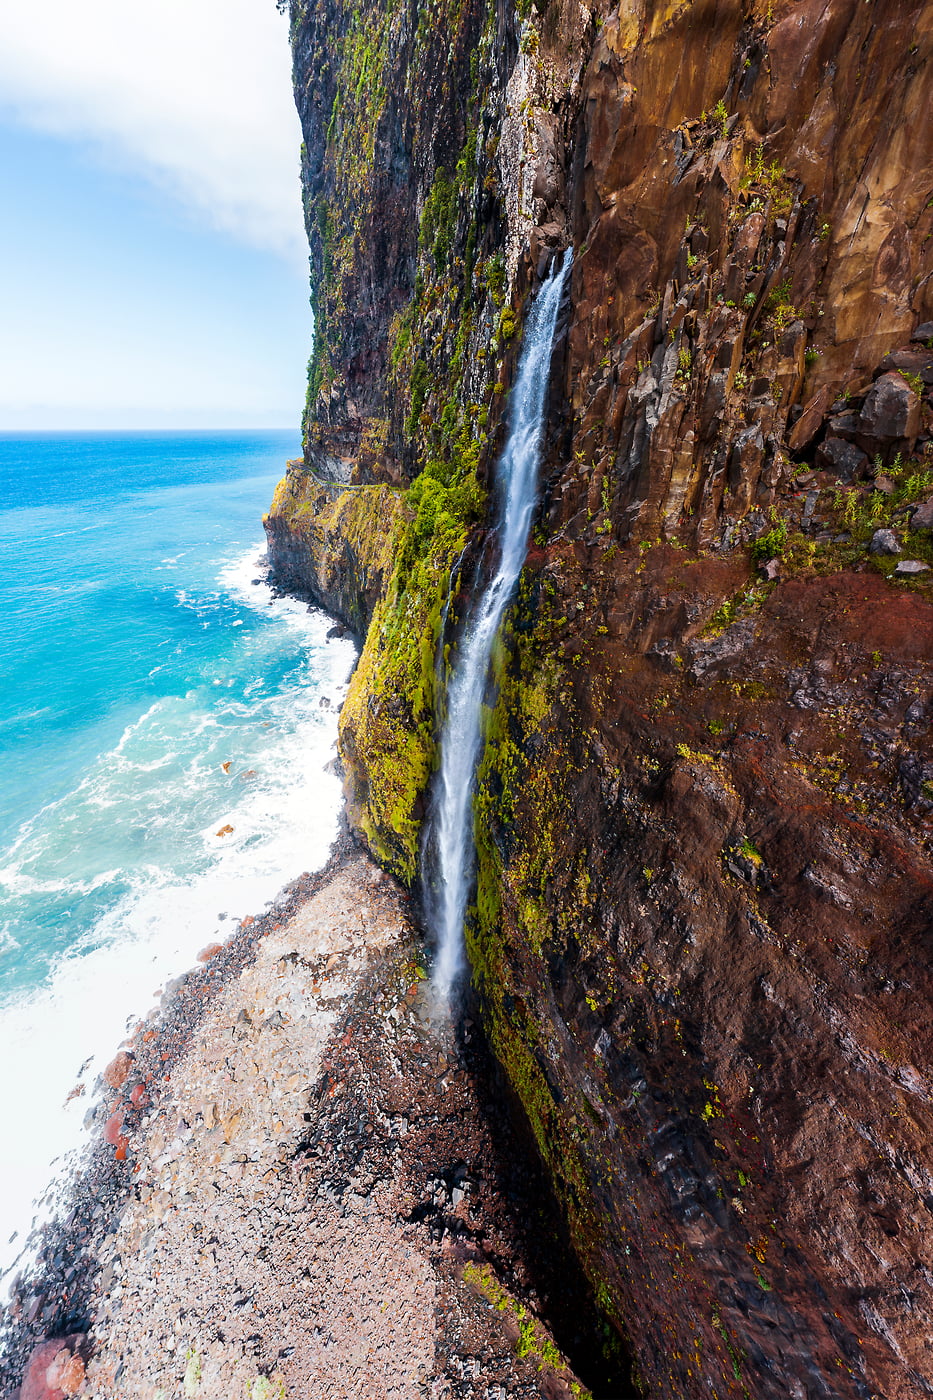 150 megapixels! A very high resolution, large-format VAST photo print of a waterfall along the Madeira coastline; photograph created by Roberto Moiola in Seixal, Madeira, Portugal.